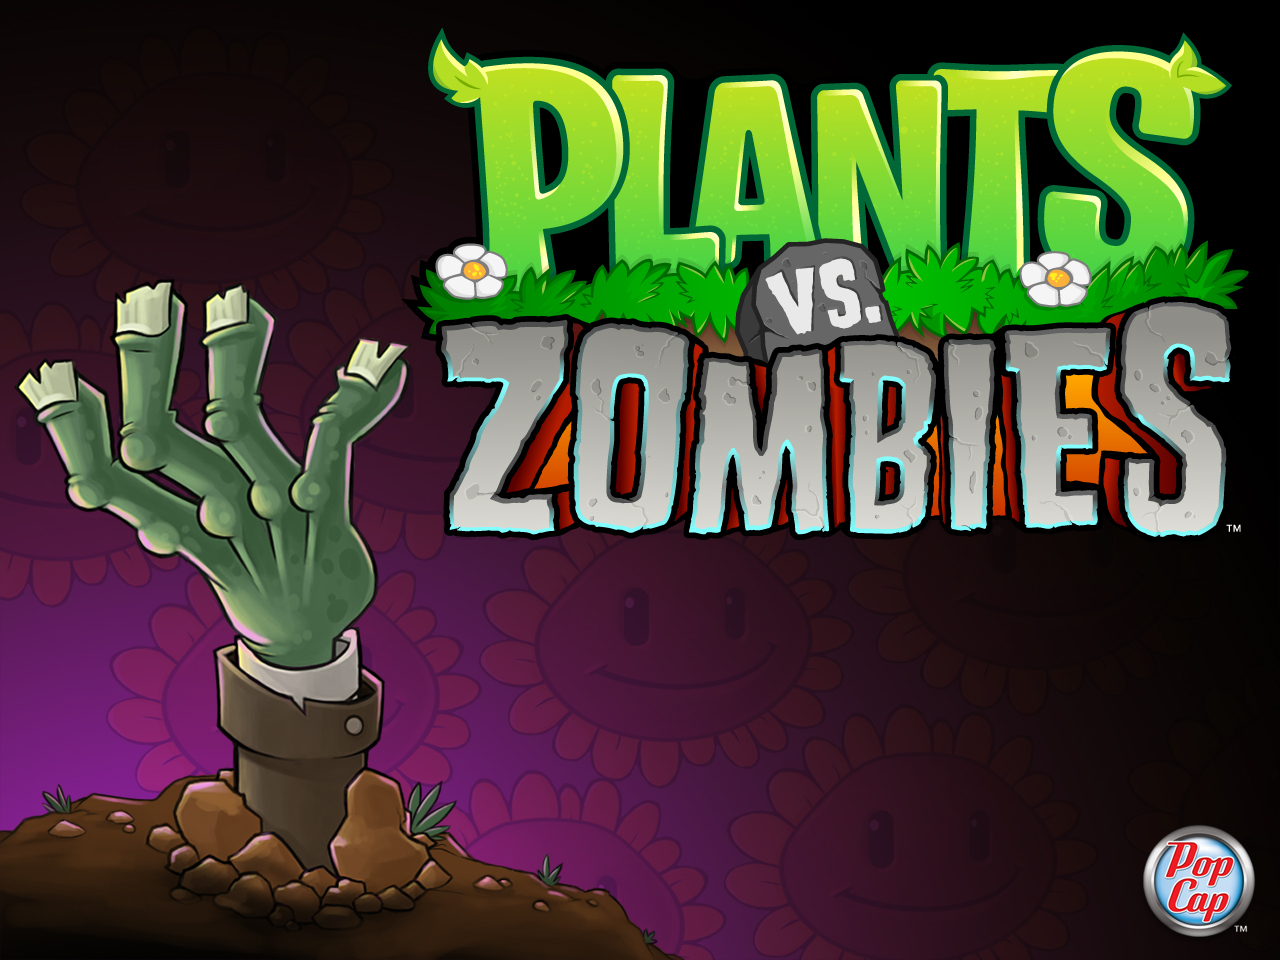 Download Plants vs. Zombies by PopCap Games